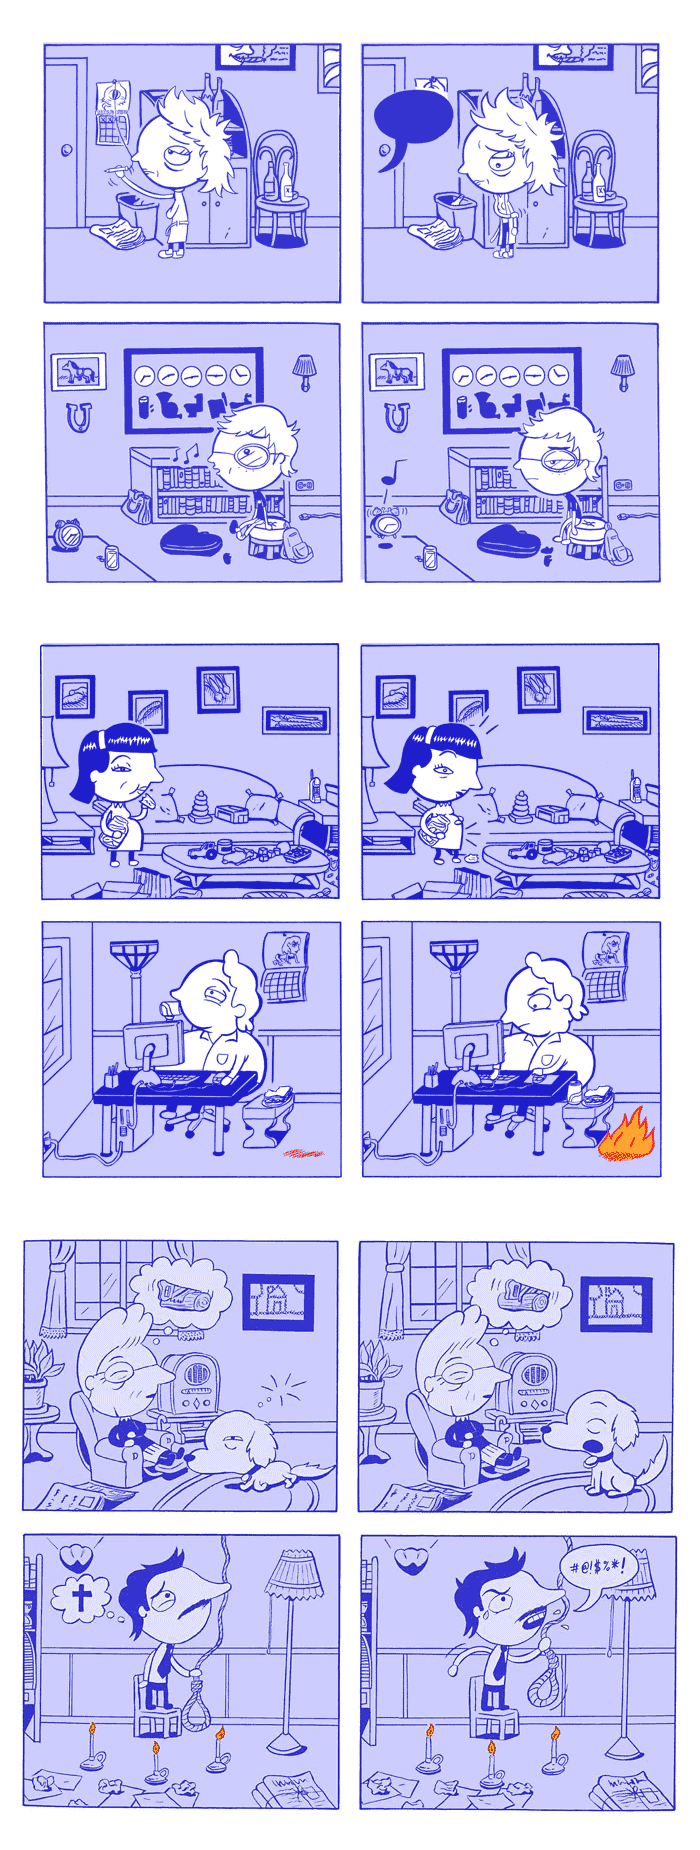 Burning Building Comix #1-#3 - Page 3